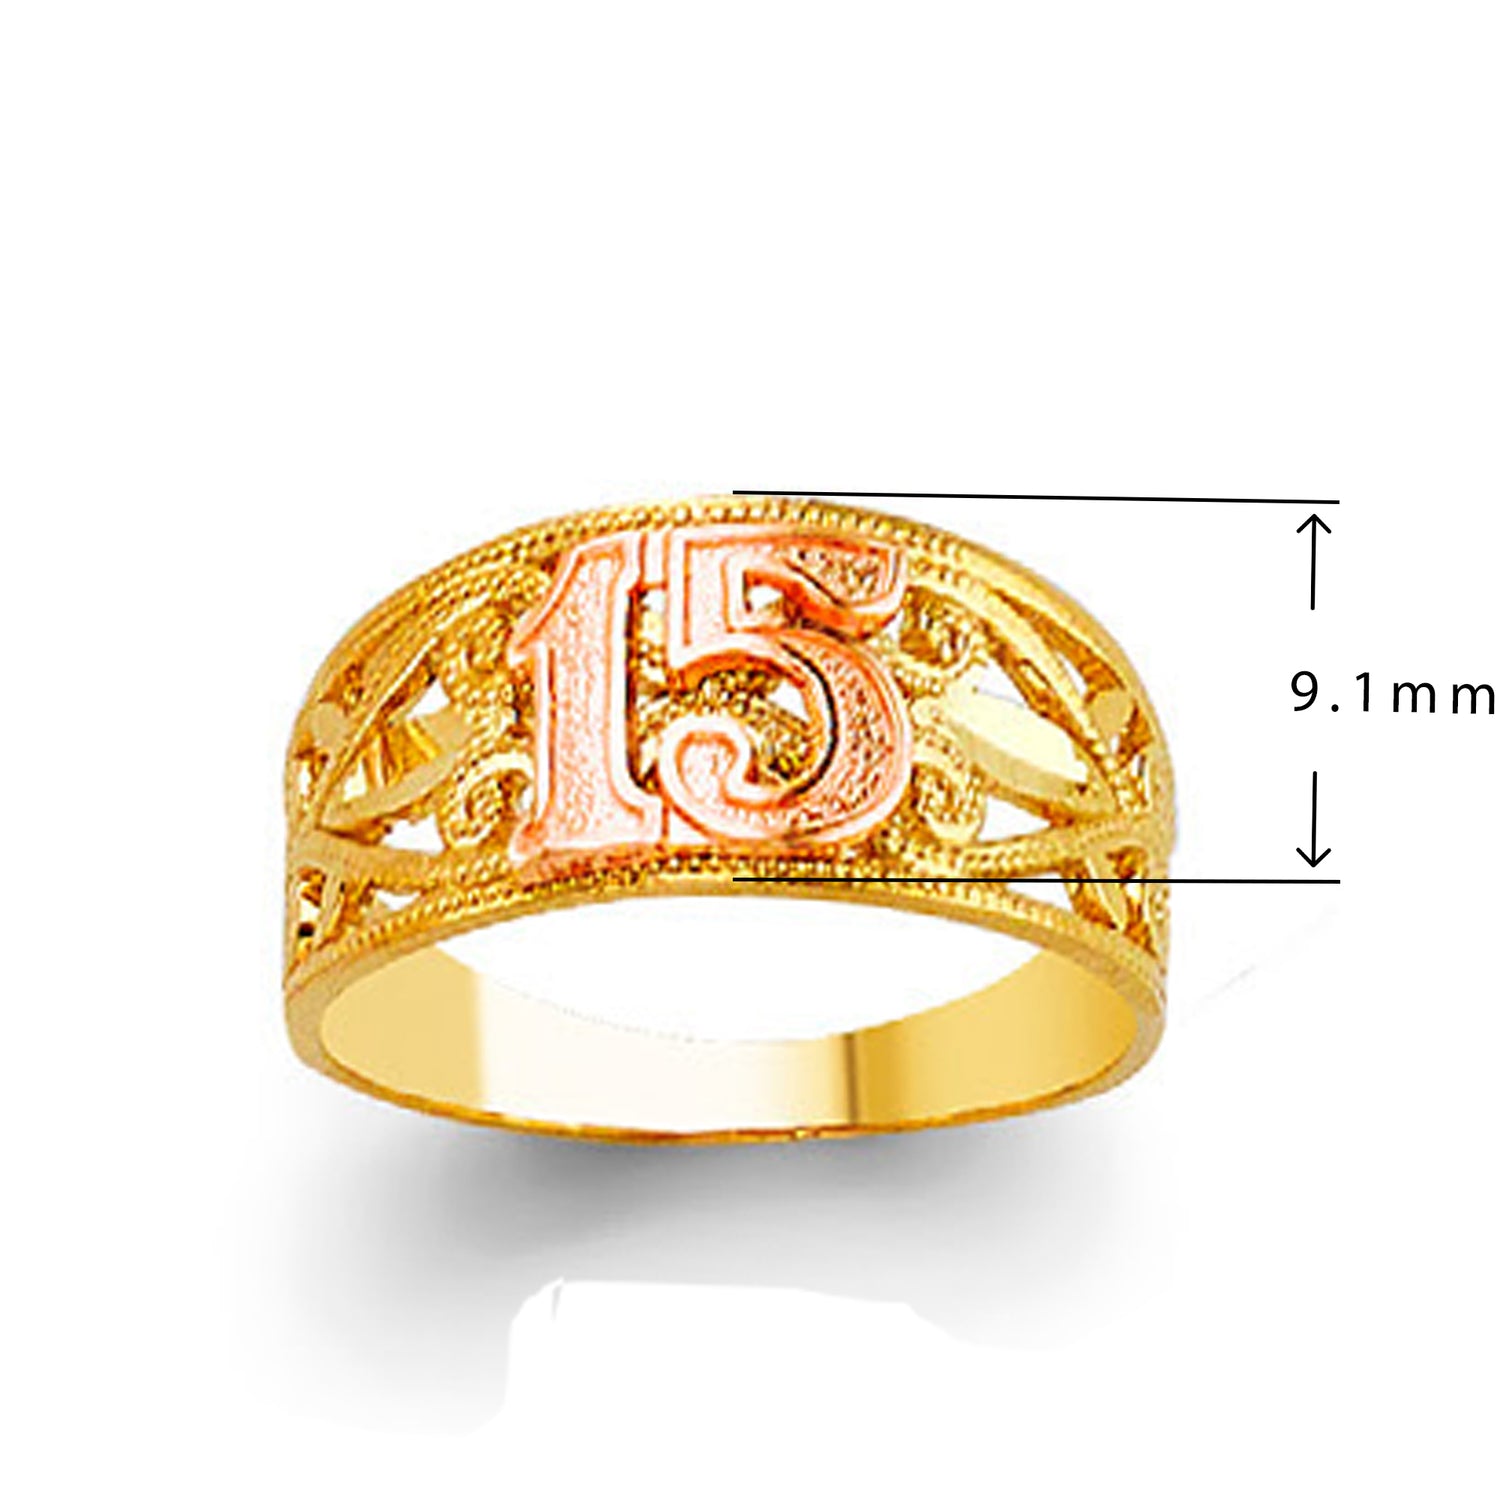 Numeric Lattice Textured Ring in Solid Gold with Measurement